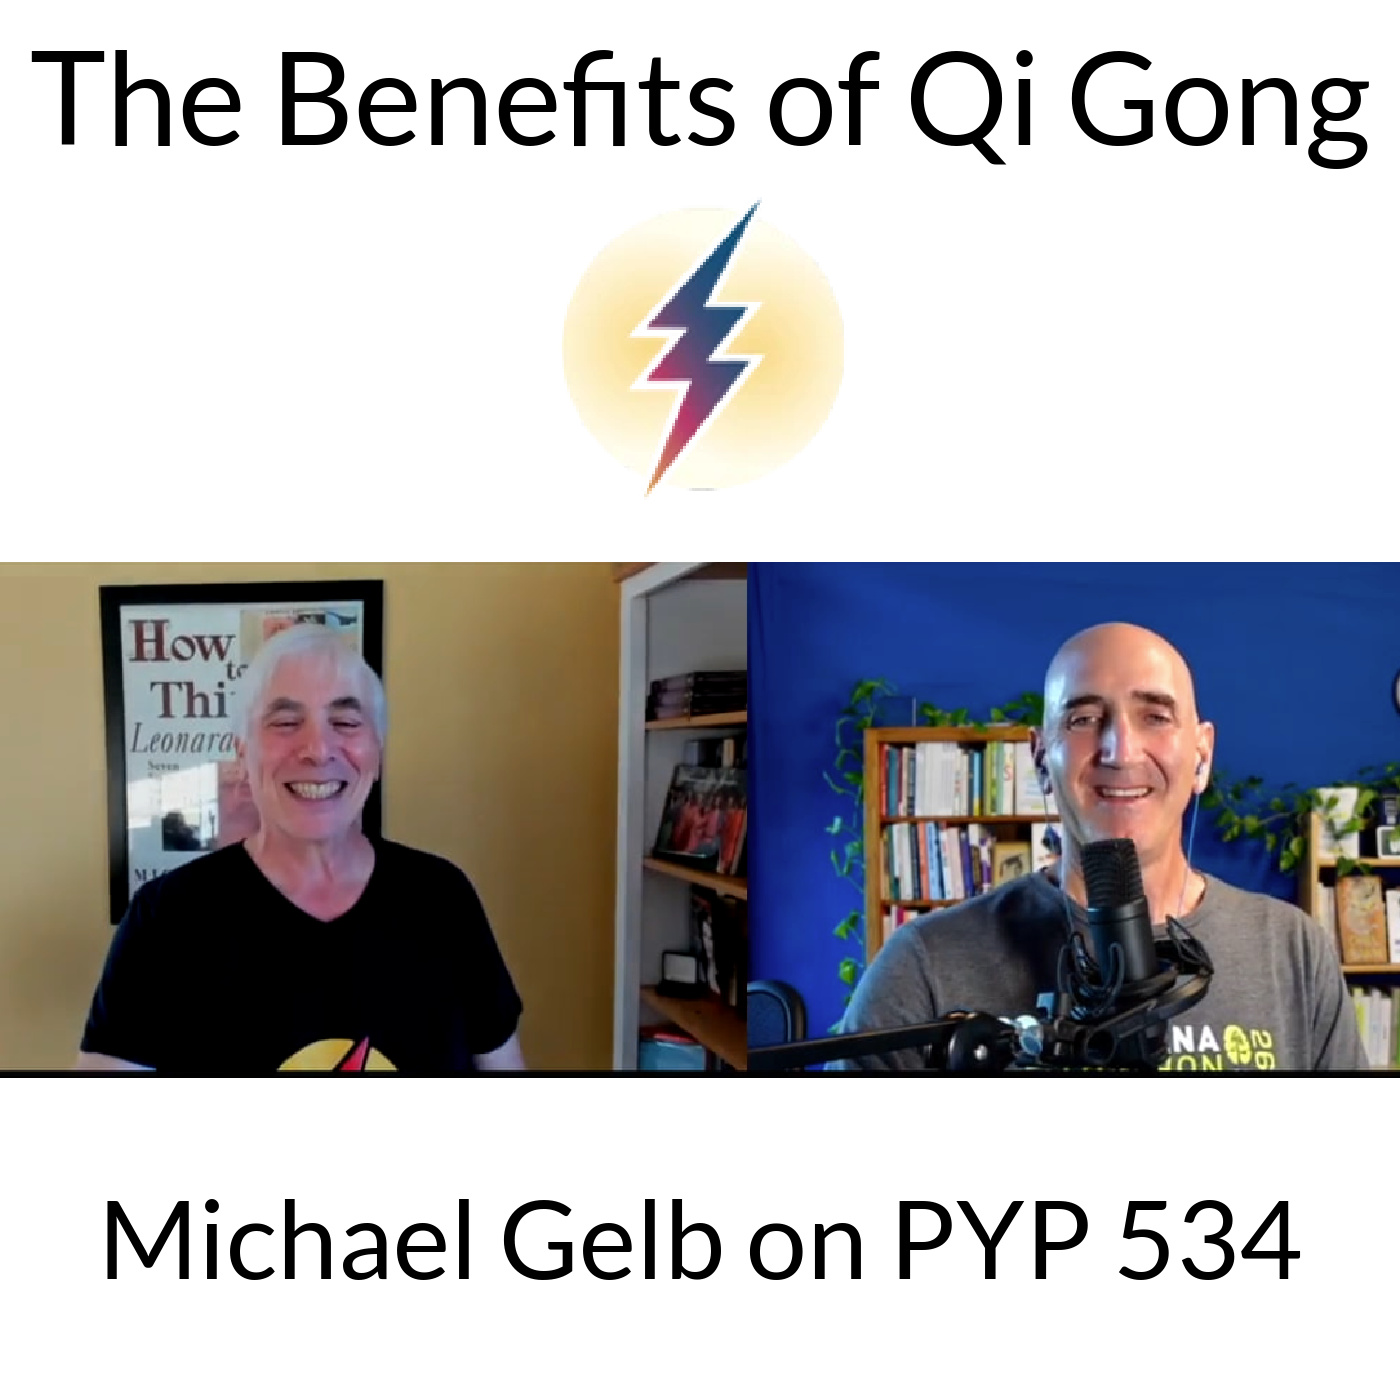 The Benefits of Qi Gong: Michael Gelb on PYP 534